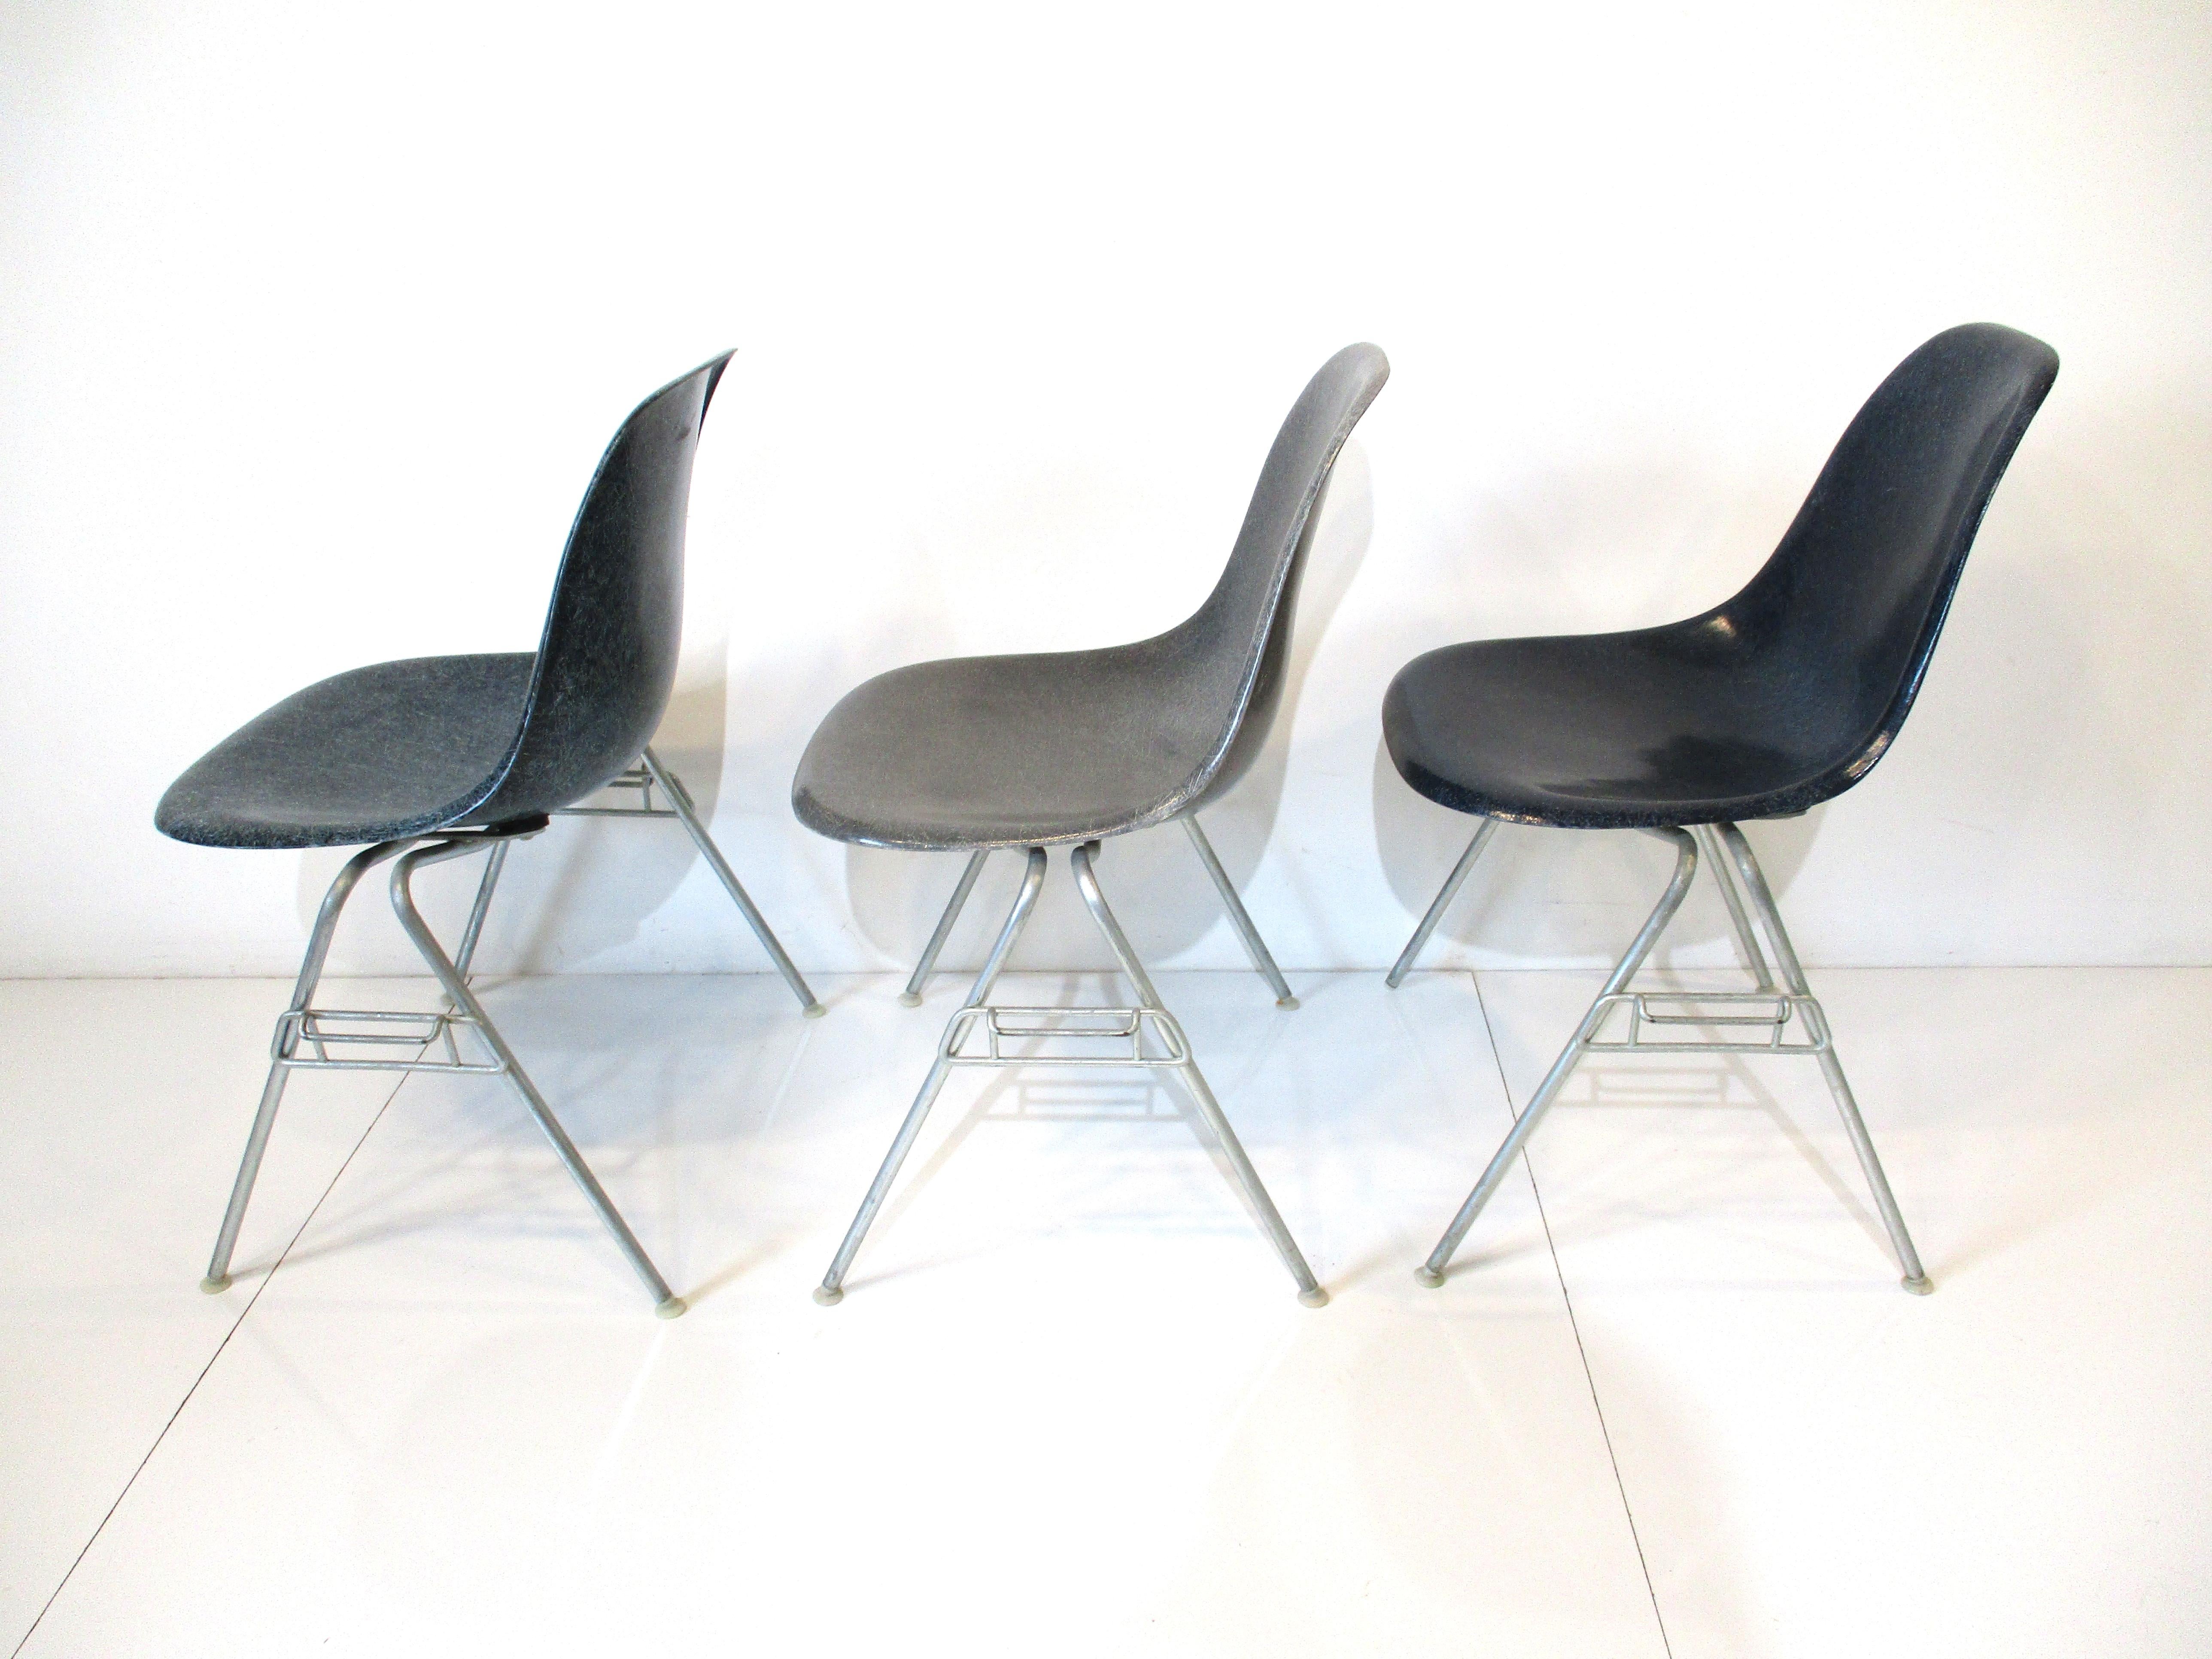 A set of three fiberglass DSS stacking dining chairs with zinc H bases and nylon foot pads . The colors are gray , medium blue and dark blue with the Herman Miller molded manufactures mark and ink stamp to the bottoms.